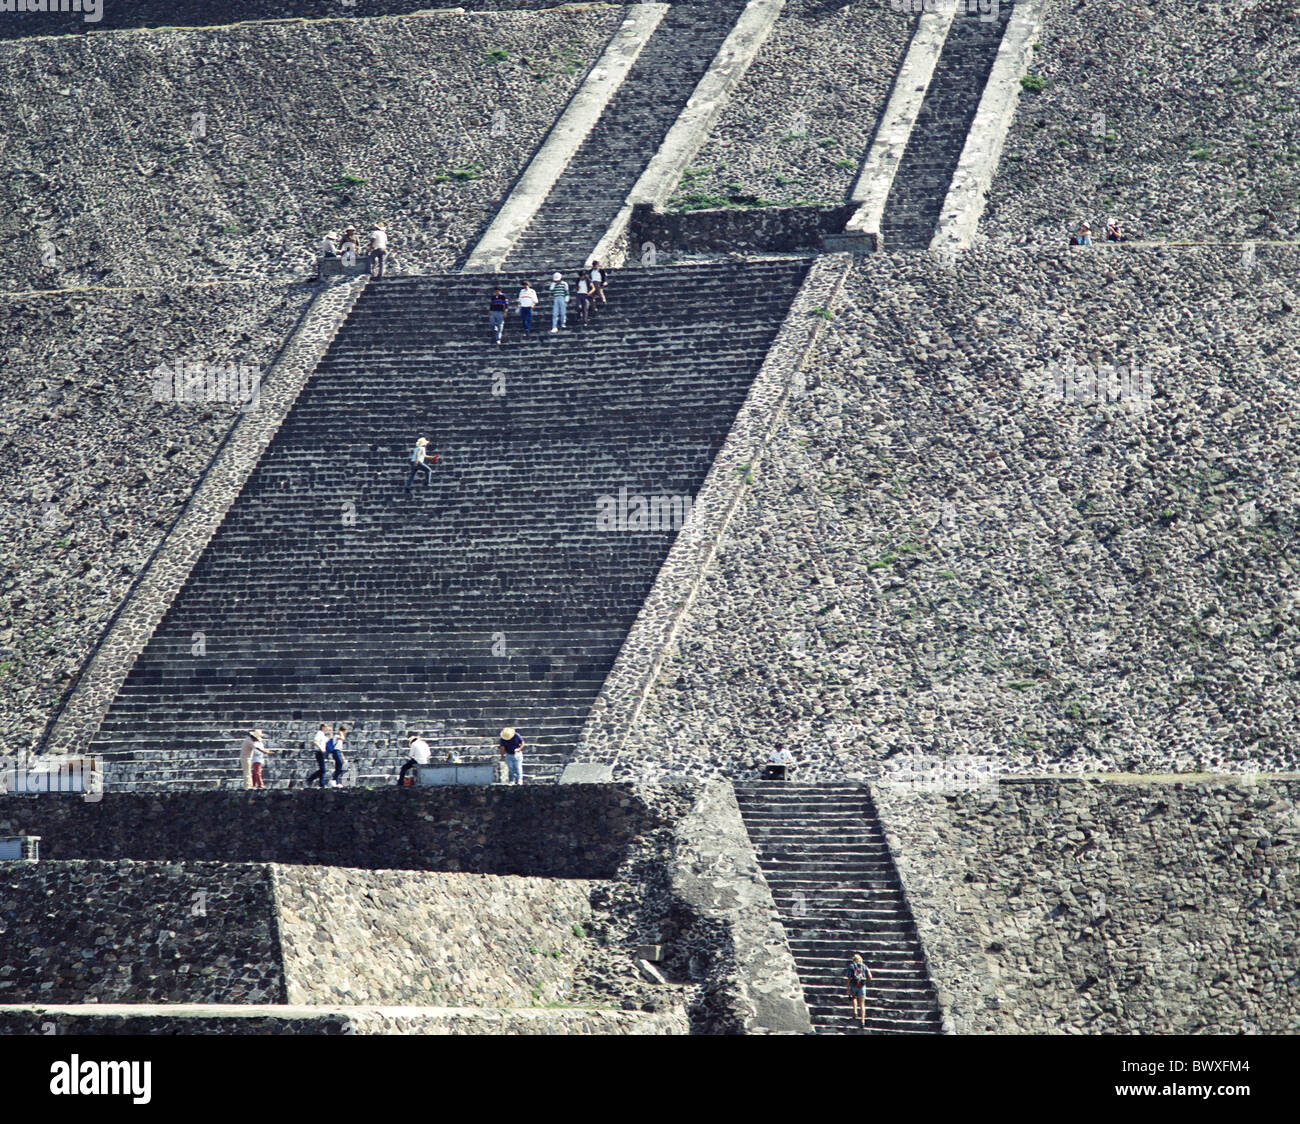 Aztecs ruins culture Mexico Central America Latin America persons suns pyramid Teotihuacan stair Stock Photo